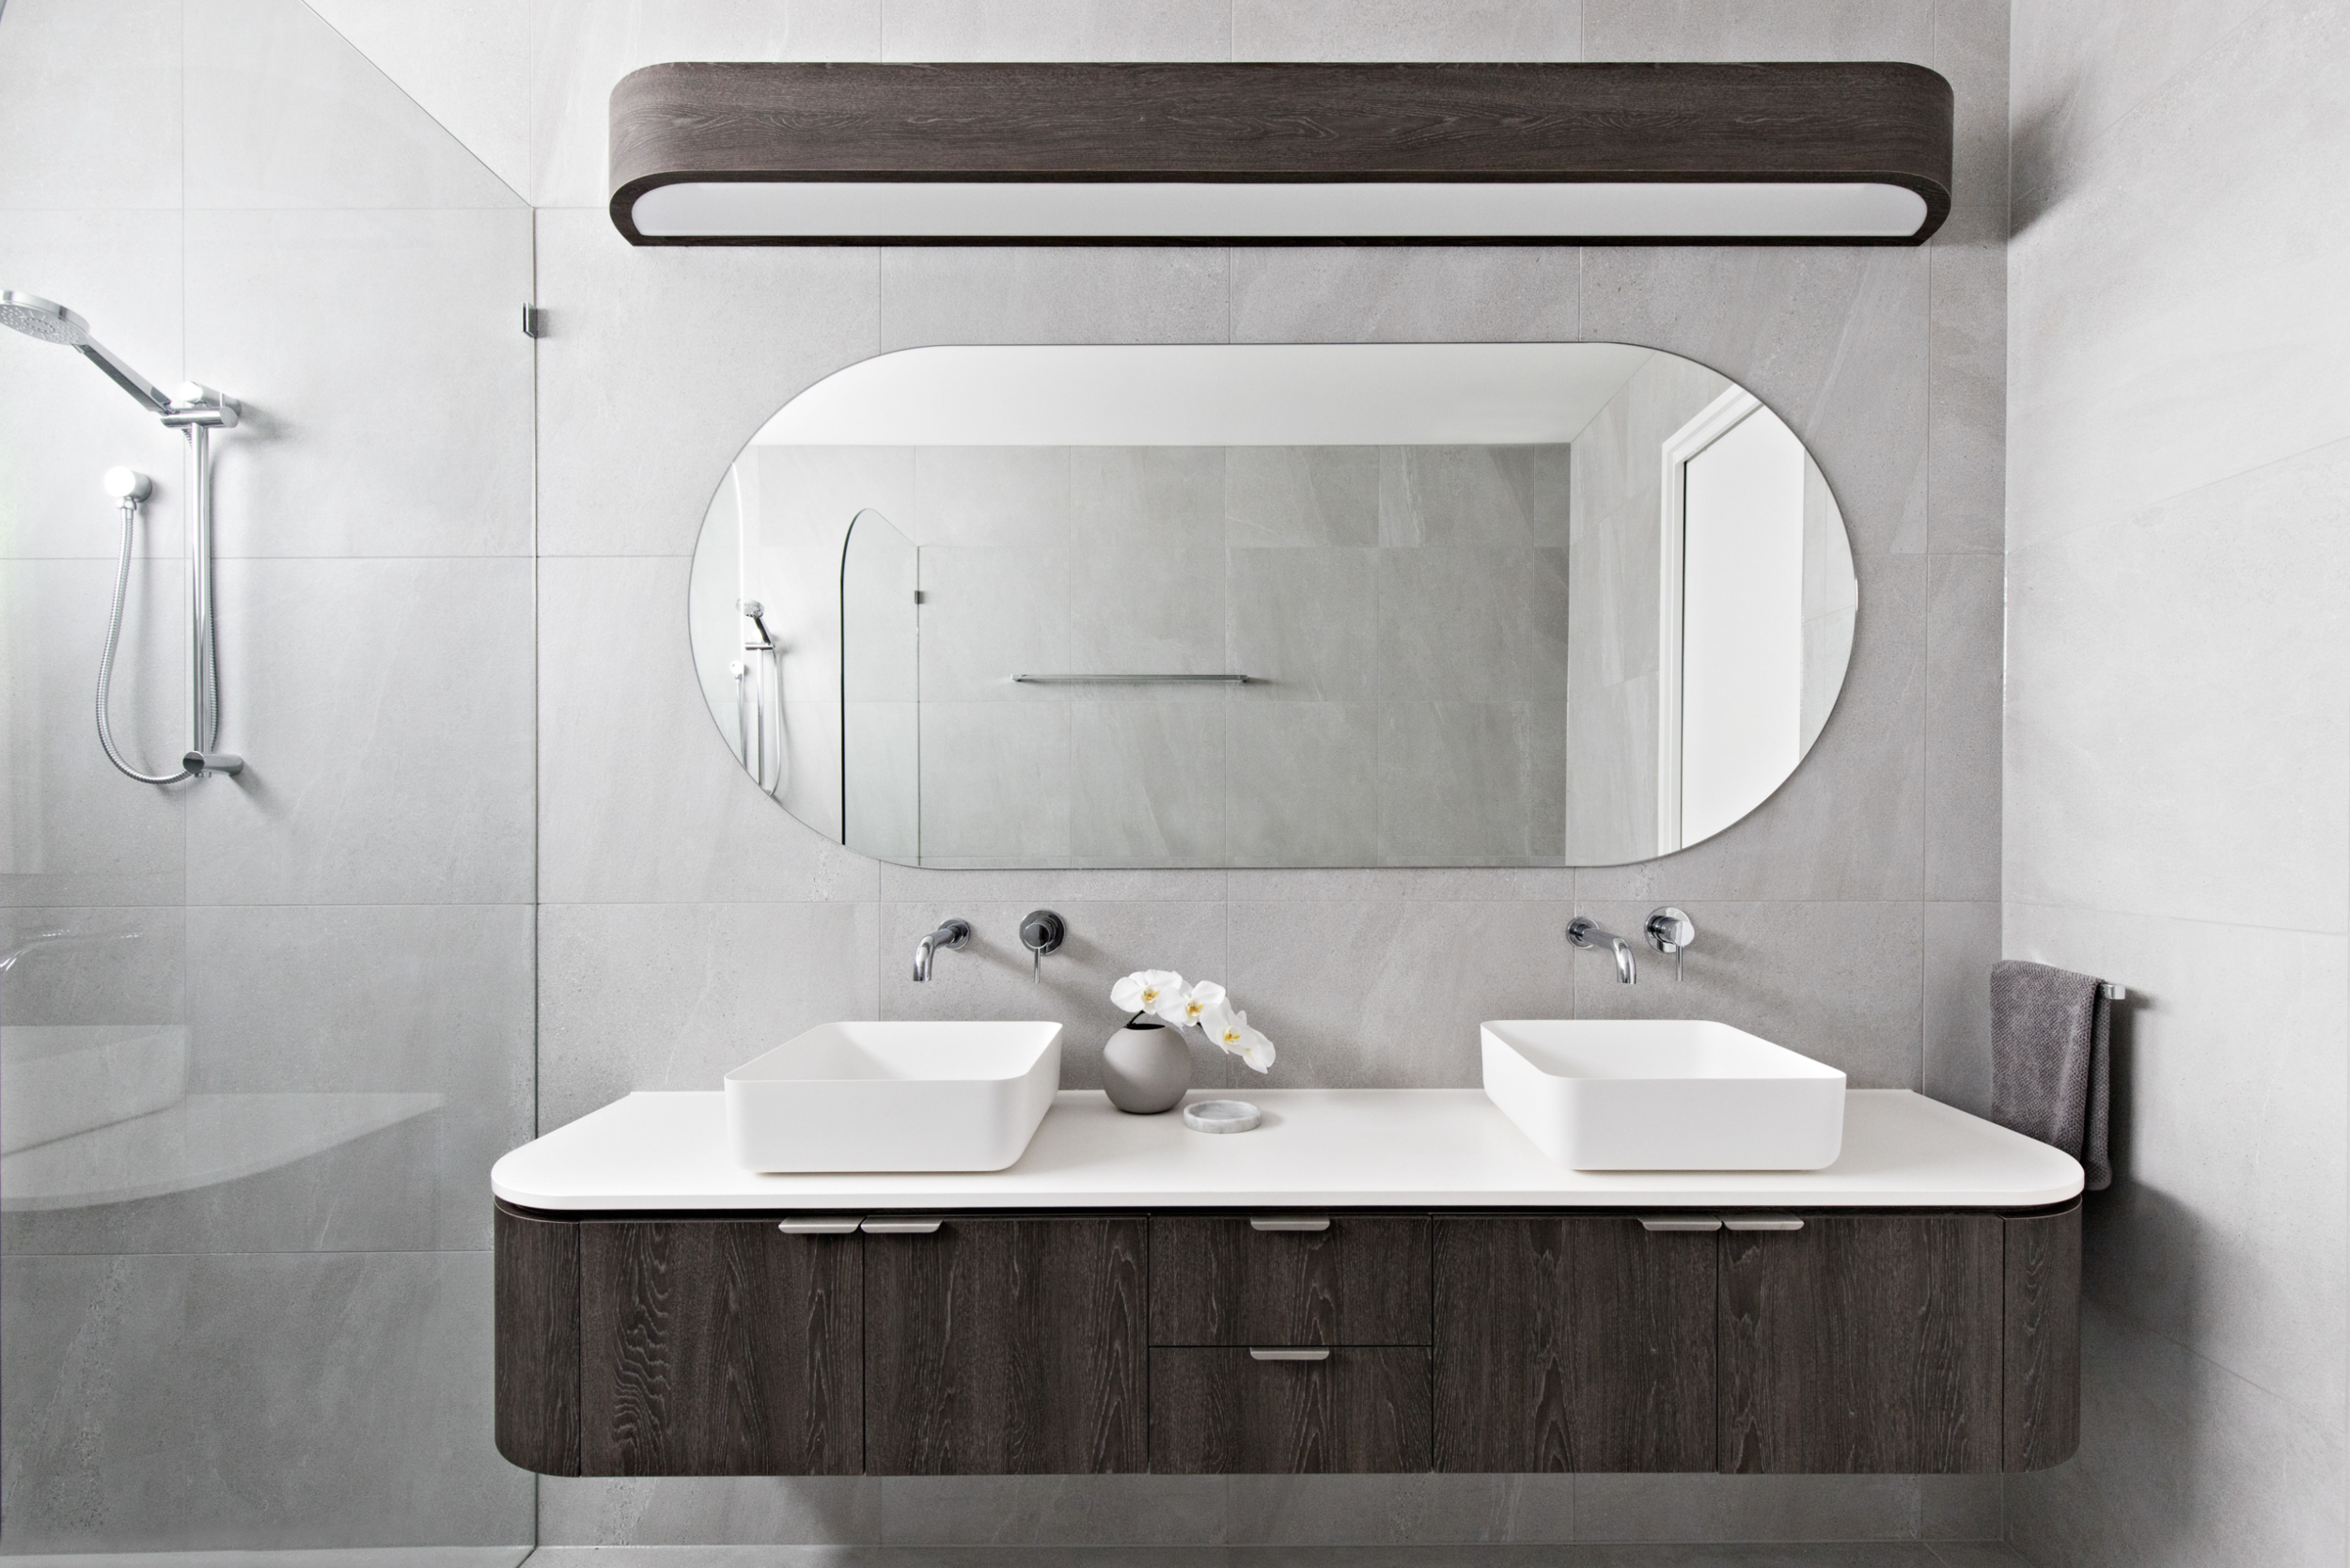 Curved Vanity And Wall Light Design, Curved Bathroom Vanity Light